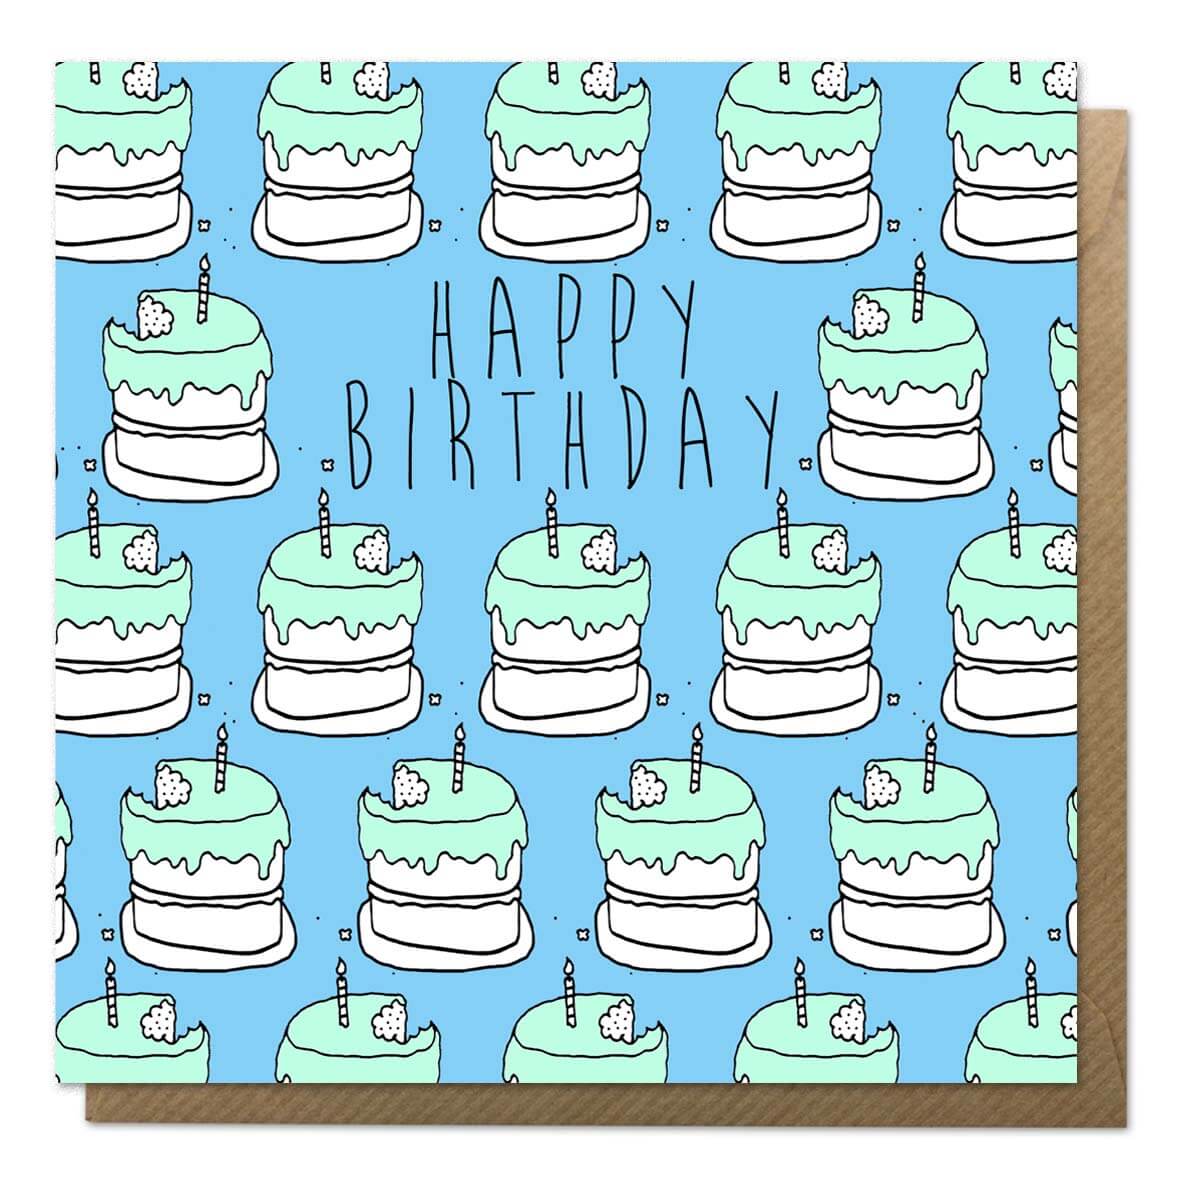 Blue birthday cake card with brown envelope